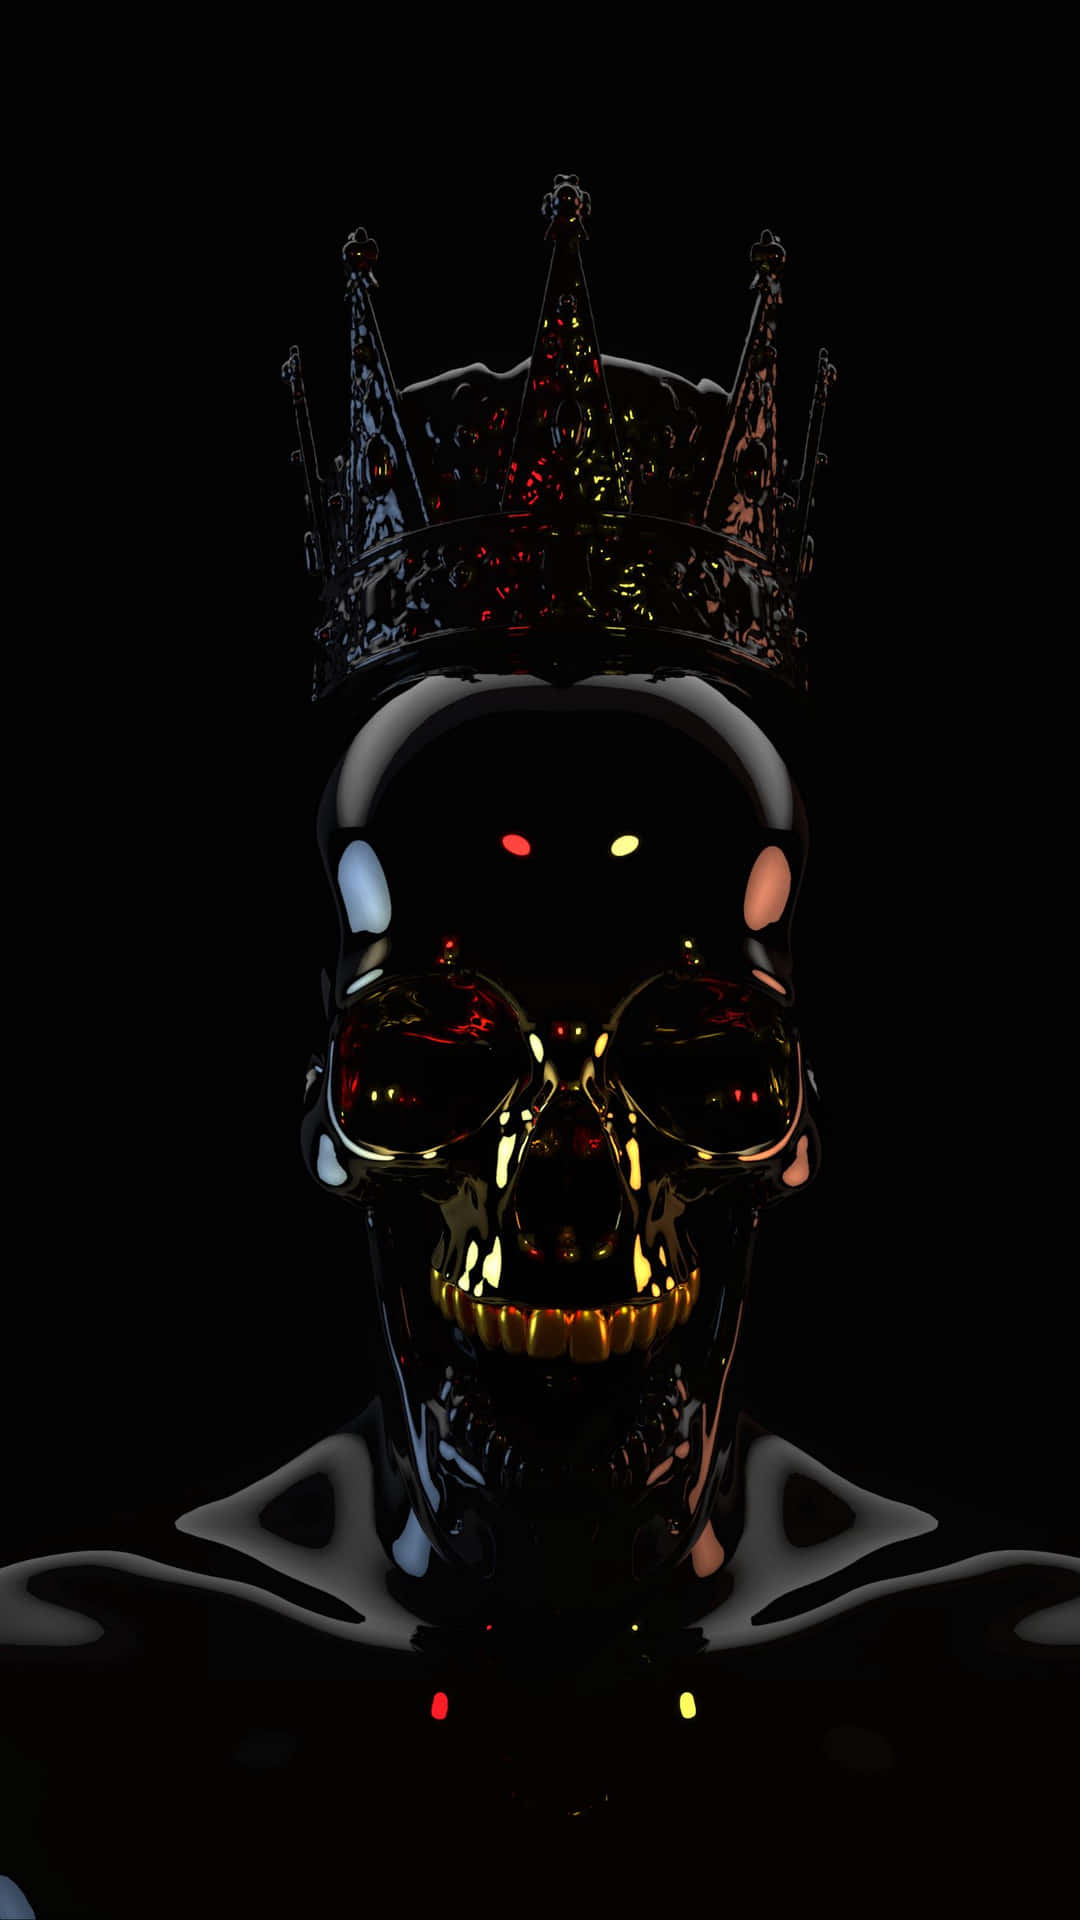 a skull with a crown on his head Wallpaper